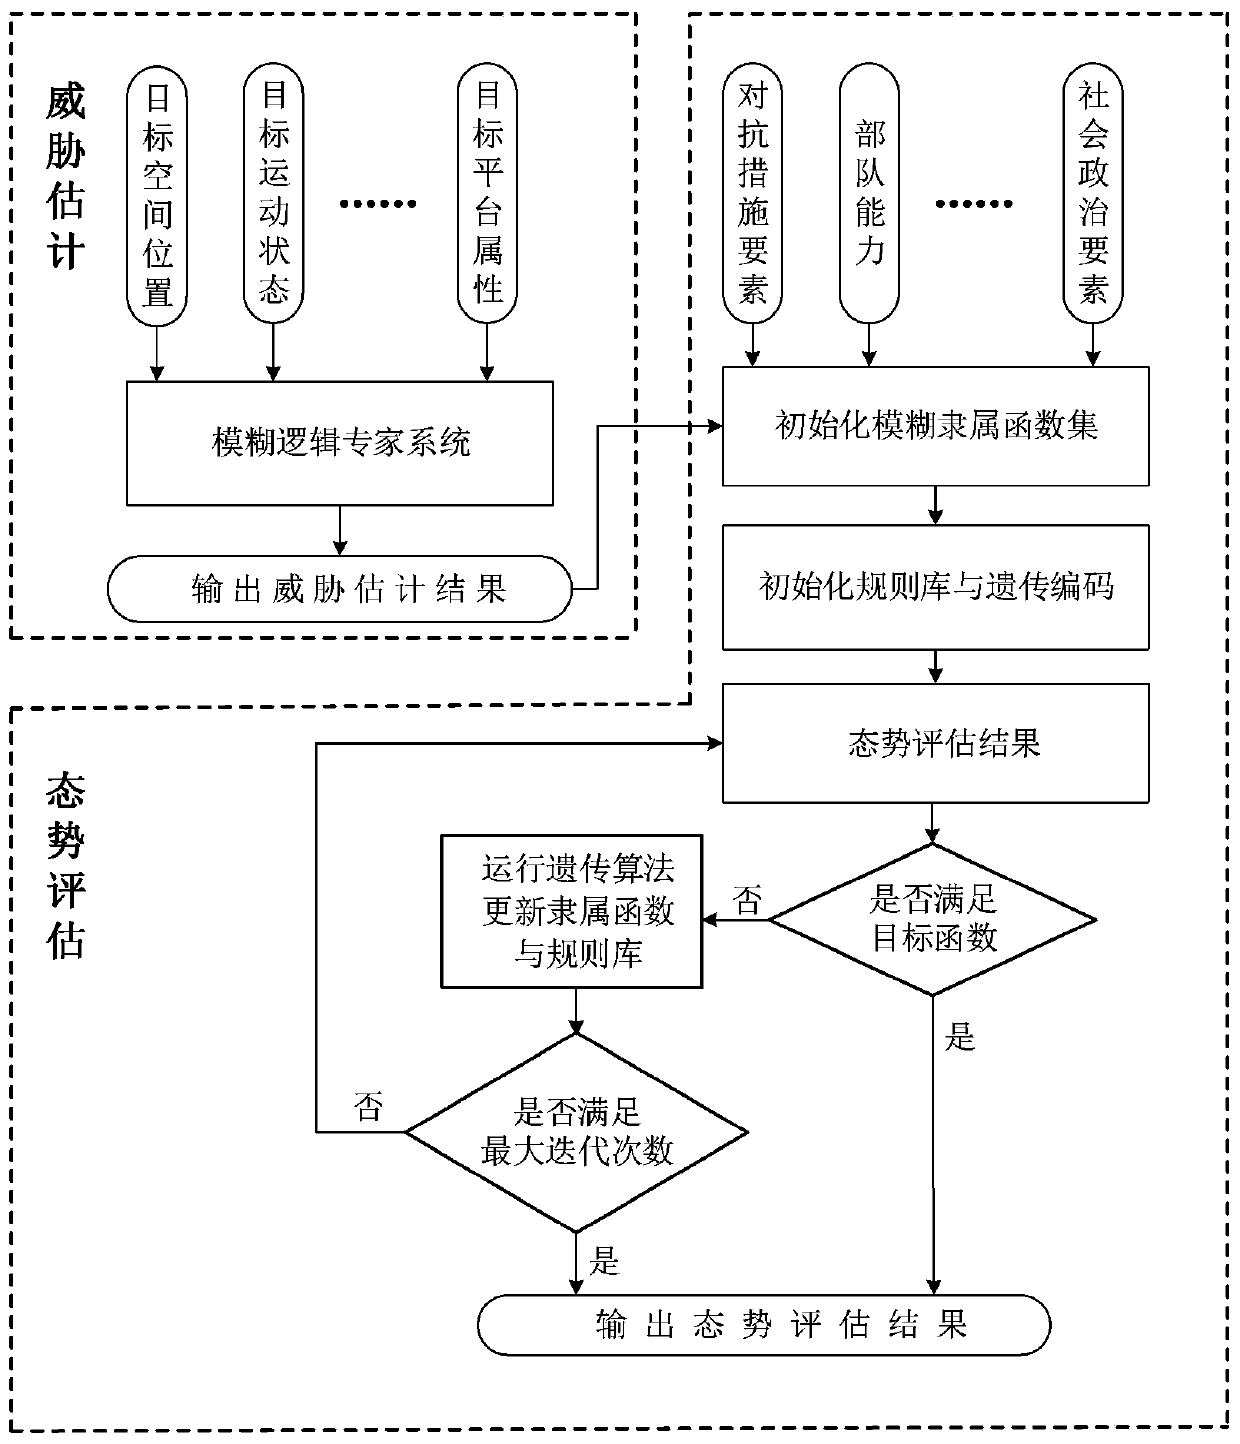 Threat estimation and situation assessment method based on genetic fuzzy logic tree